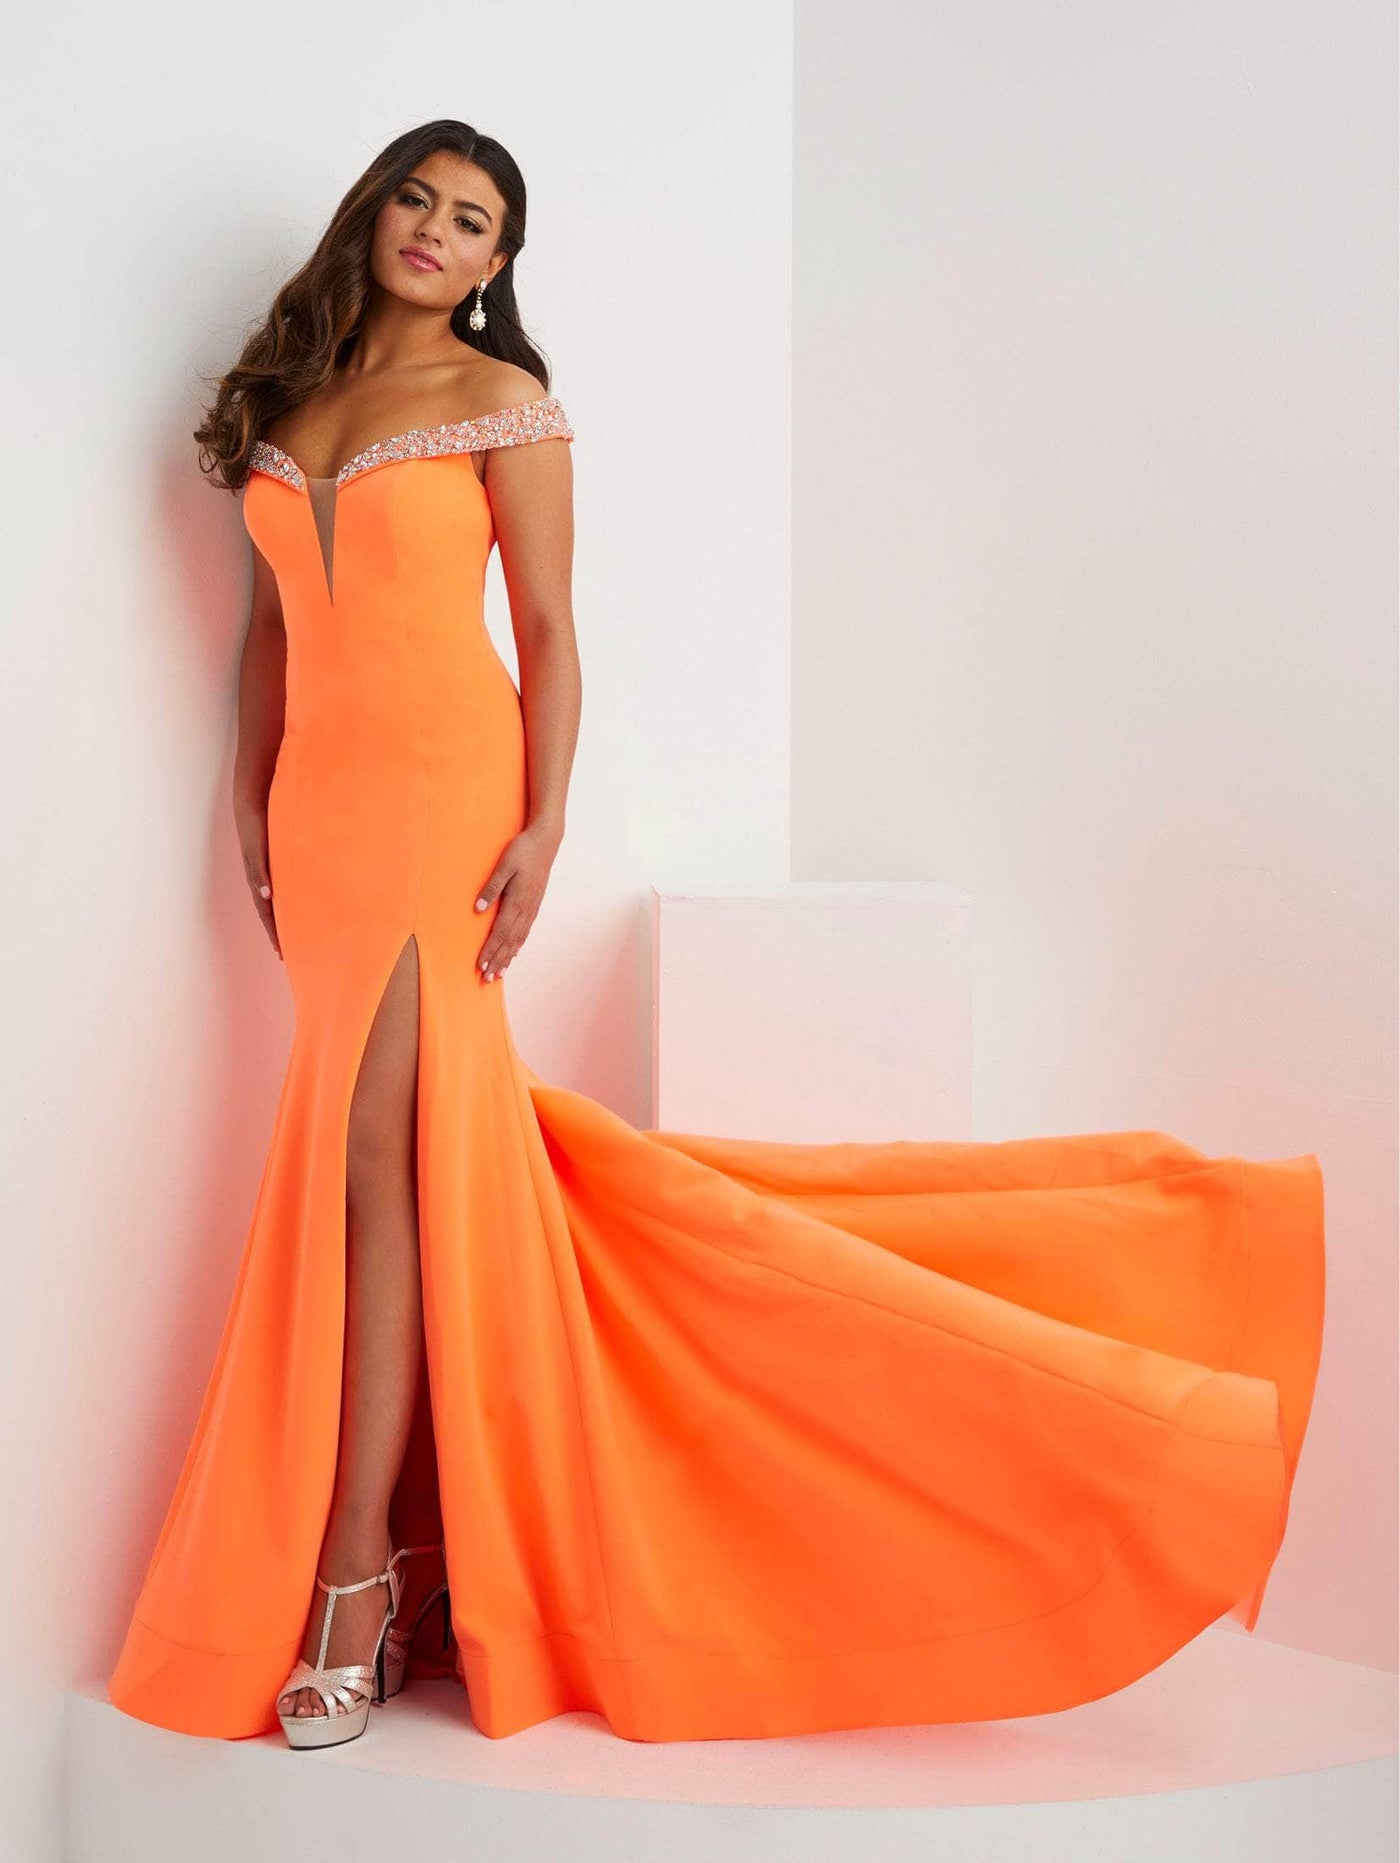 Panoply 14129 - Jeweled Neon Evening Gown Prom Dresses 0 / Neon Orange